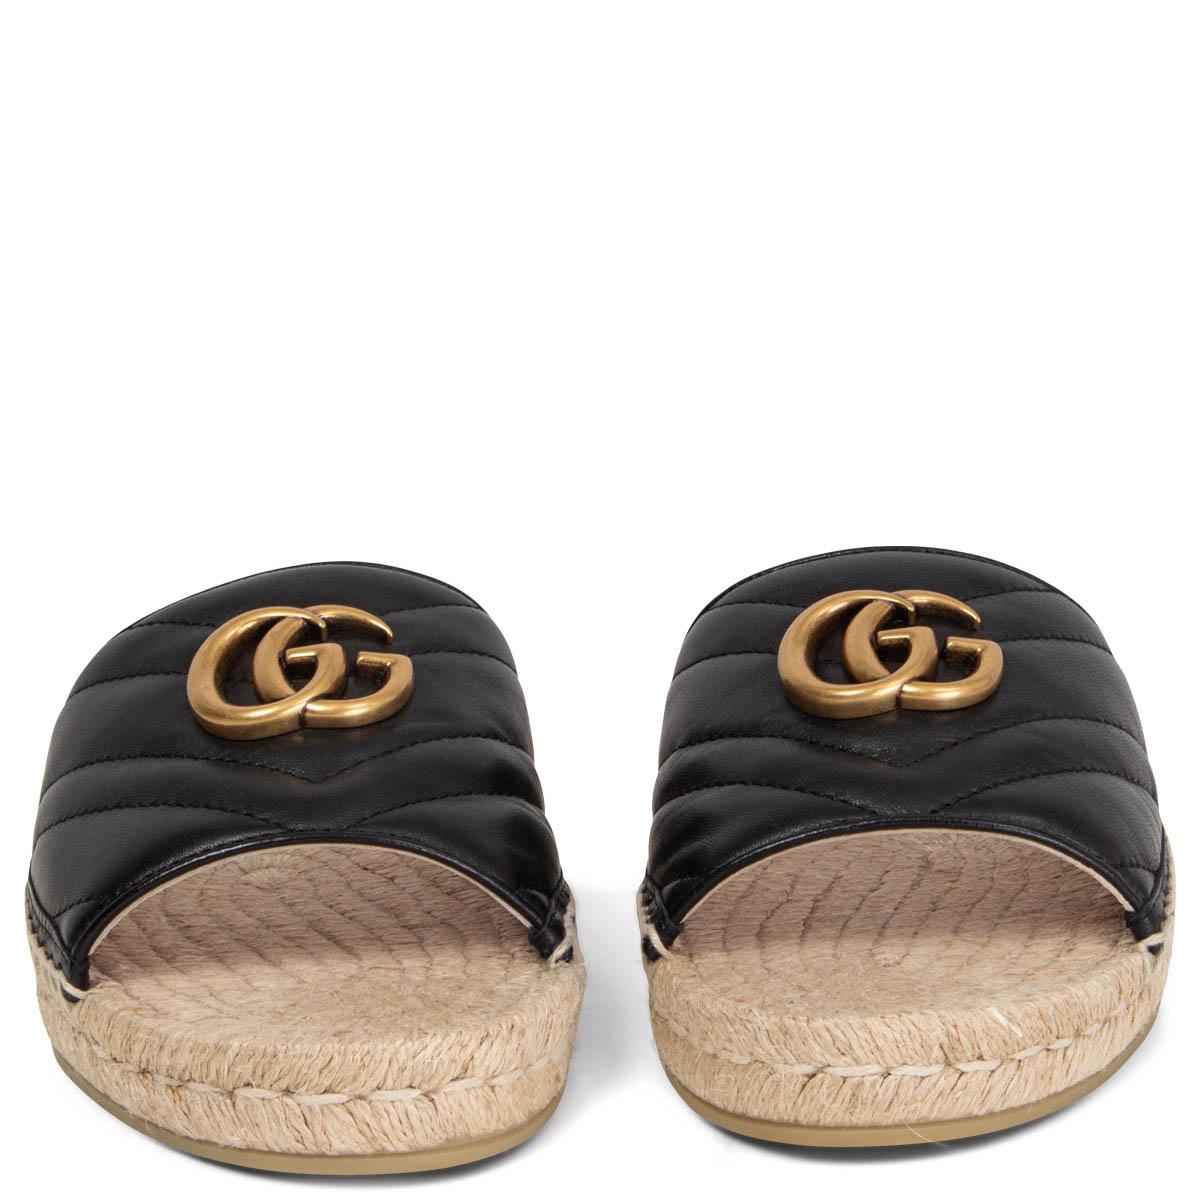 100% authentic Gucci Marmont Pilar GG Quilted Leather Espadrilles Slides in black quilted smooth leather with antique gold-tone GG logo and a beige espadrille sole. Brand new. Come with dust bag. 

Measurements
Imprinted Size	37
Shoe Size	37
Inside